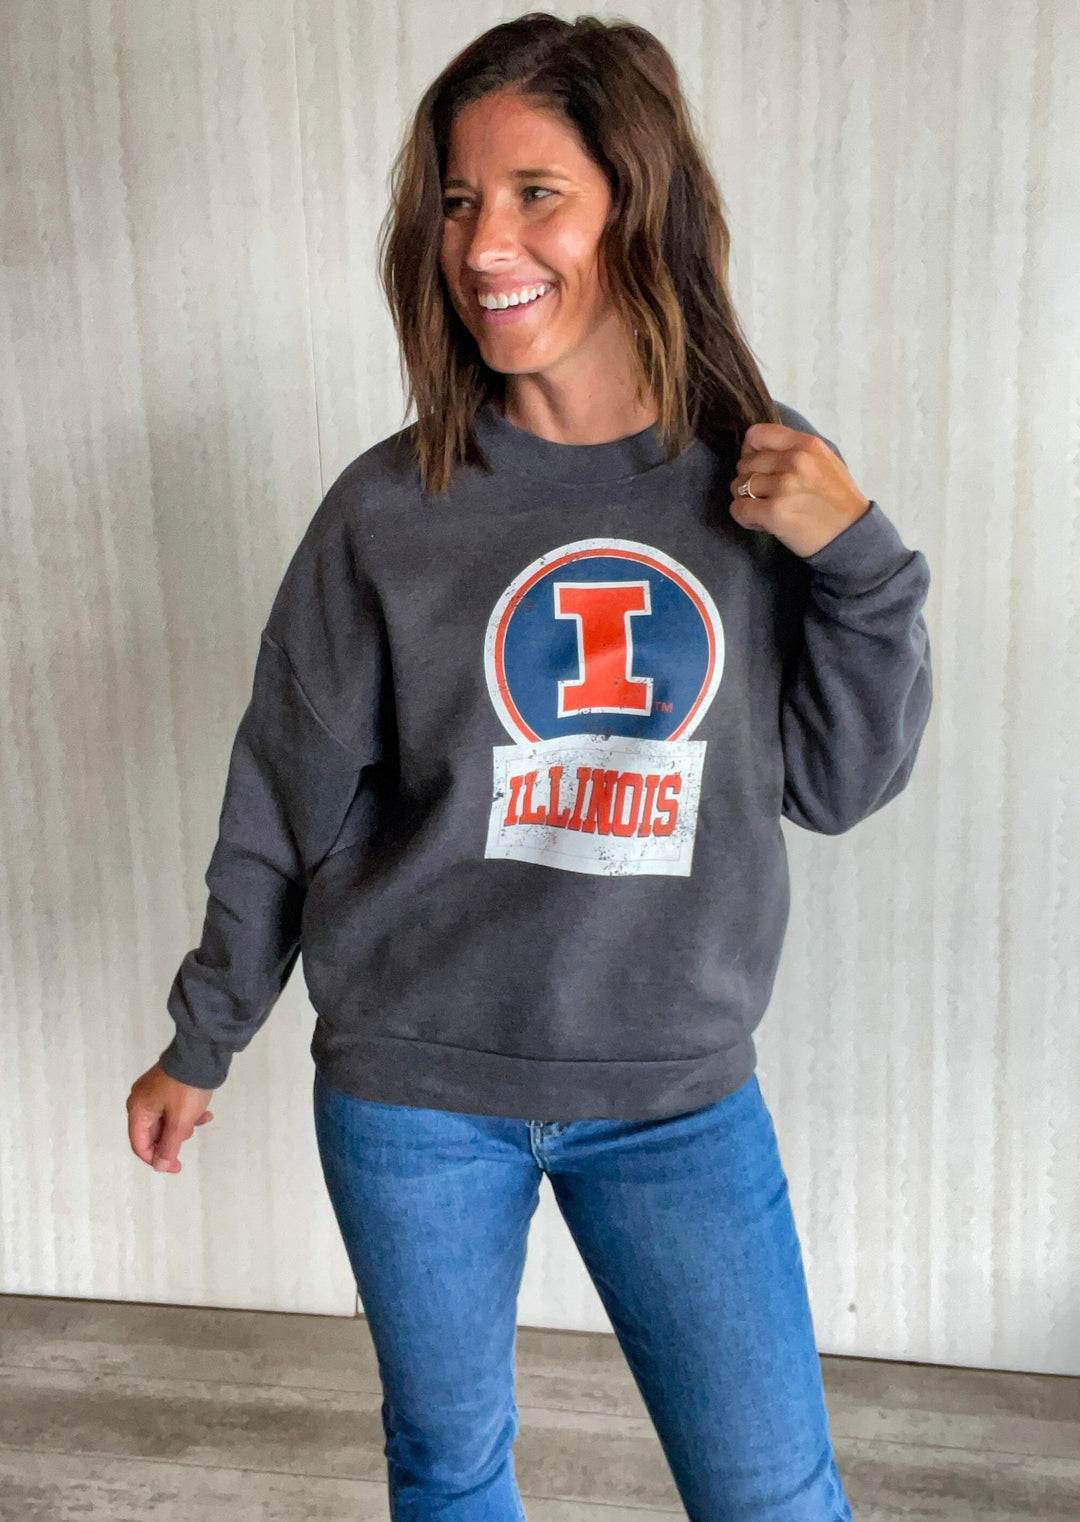 Gray Illinois Crew Sweatshirt |Game Day Couture | Champaign-Urbana Women's Game Day Clothing Boutique